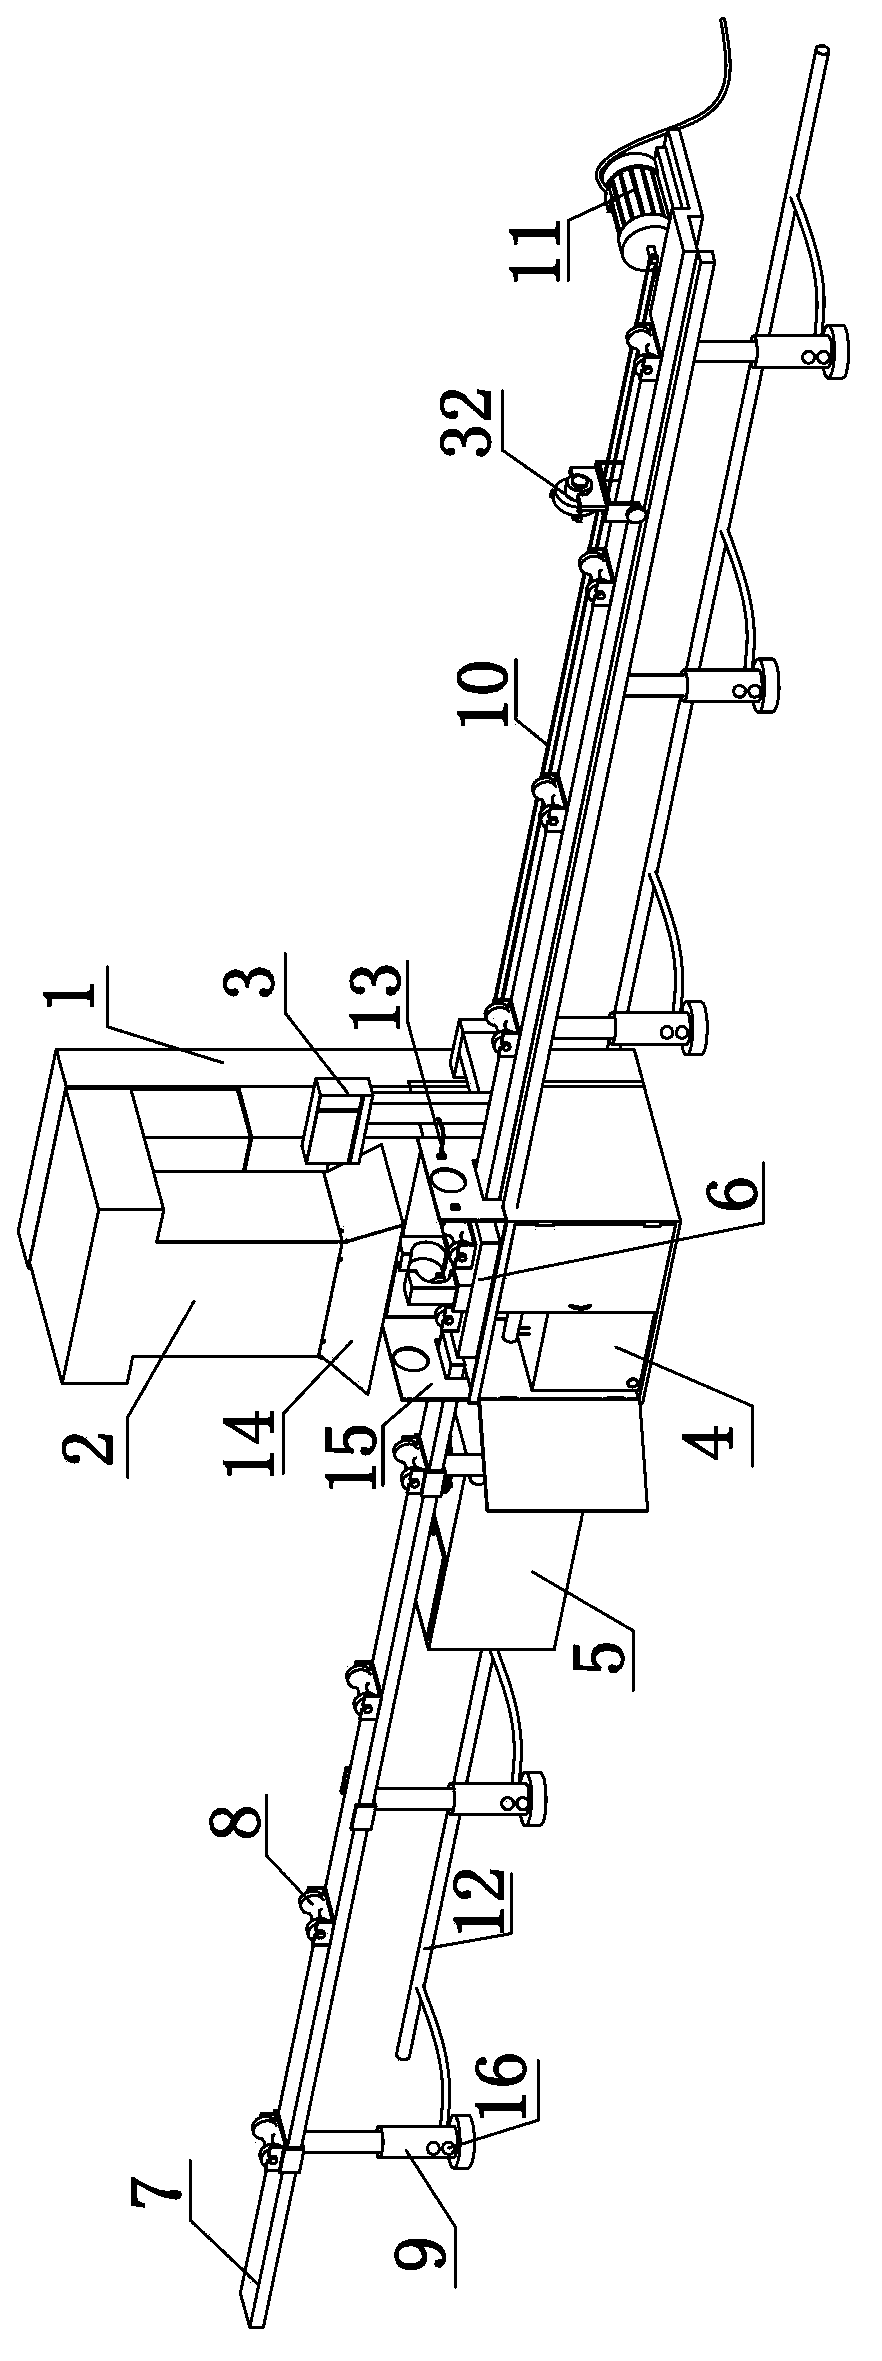 Simple numerically-controlled machine tool for machining blind holes